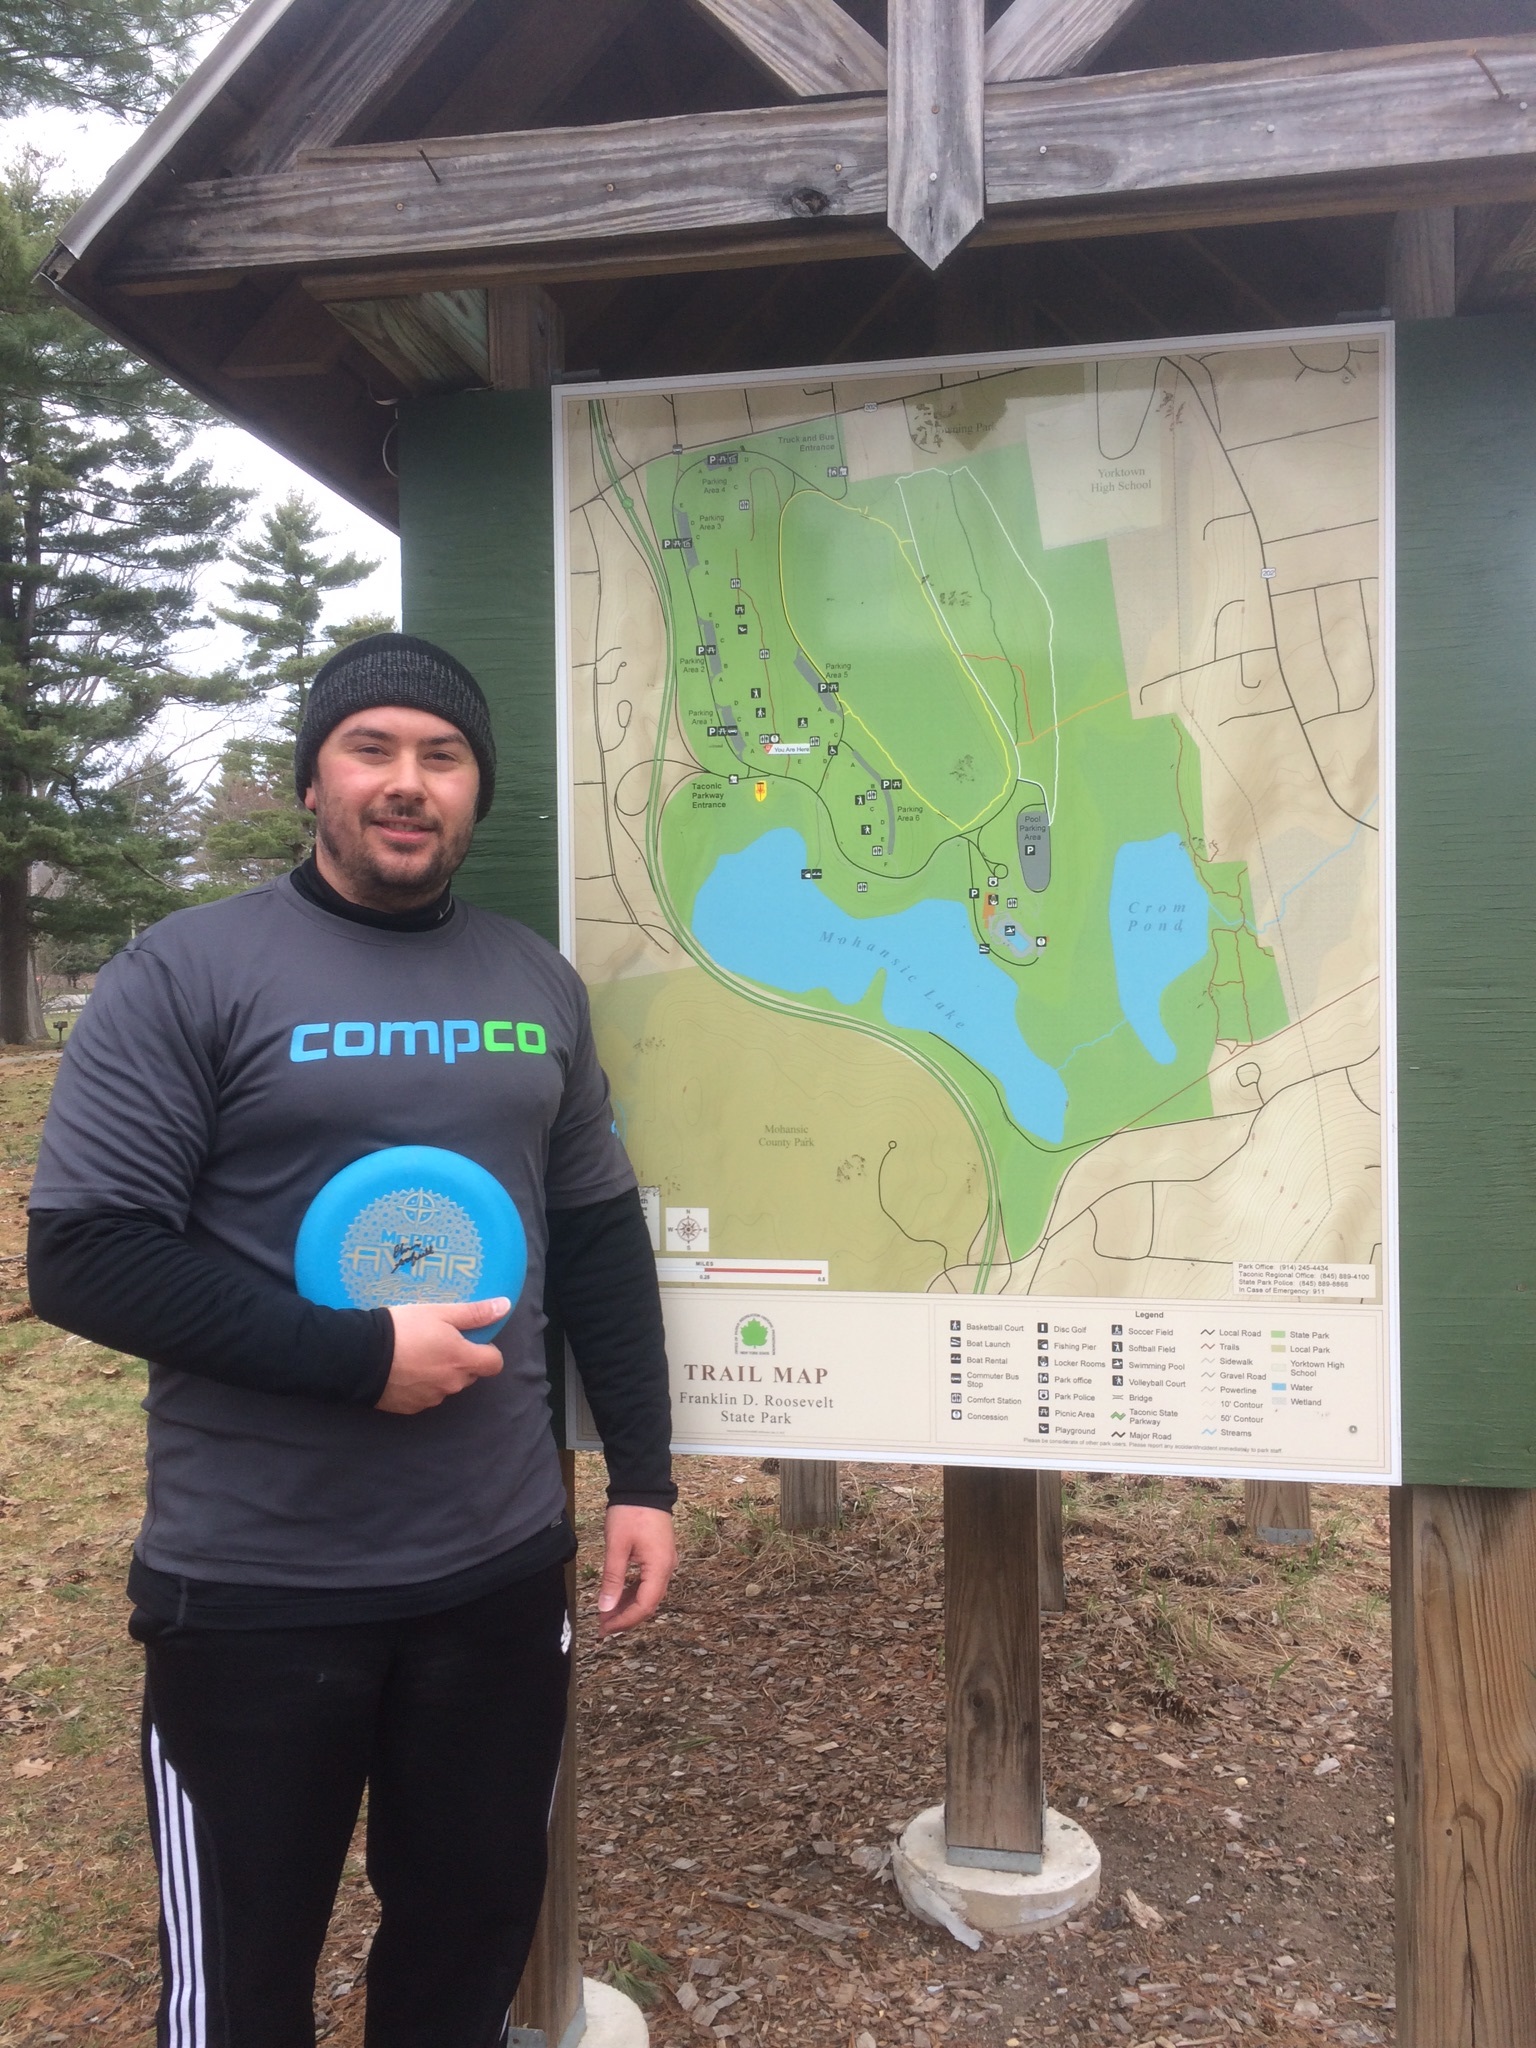  Chris Scofield (Pro disc golfer) sponsored and repping Compco in a tournament 